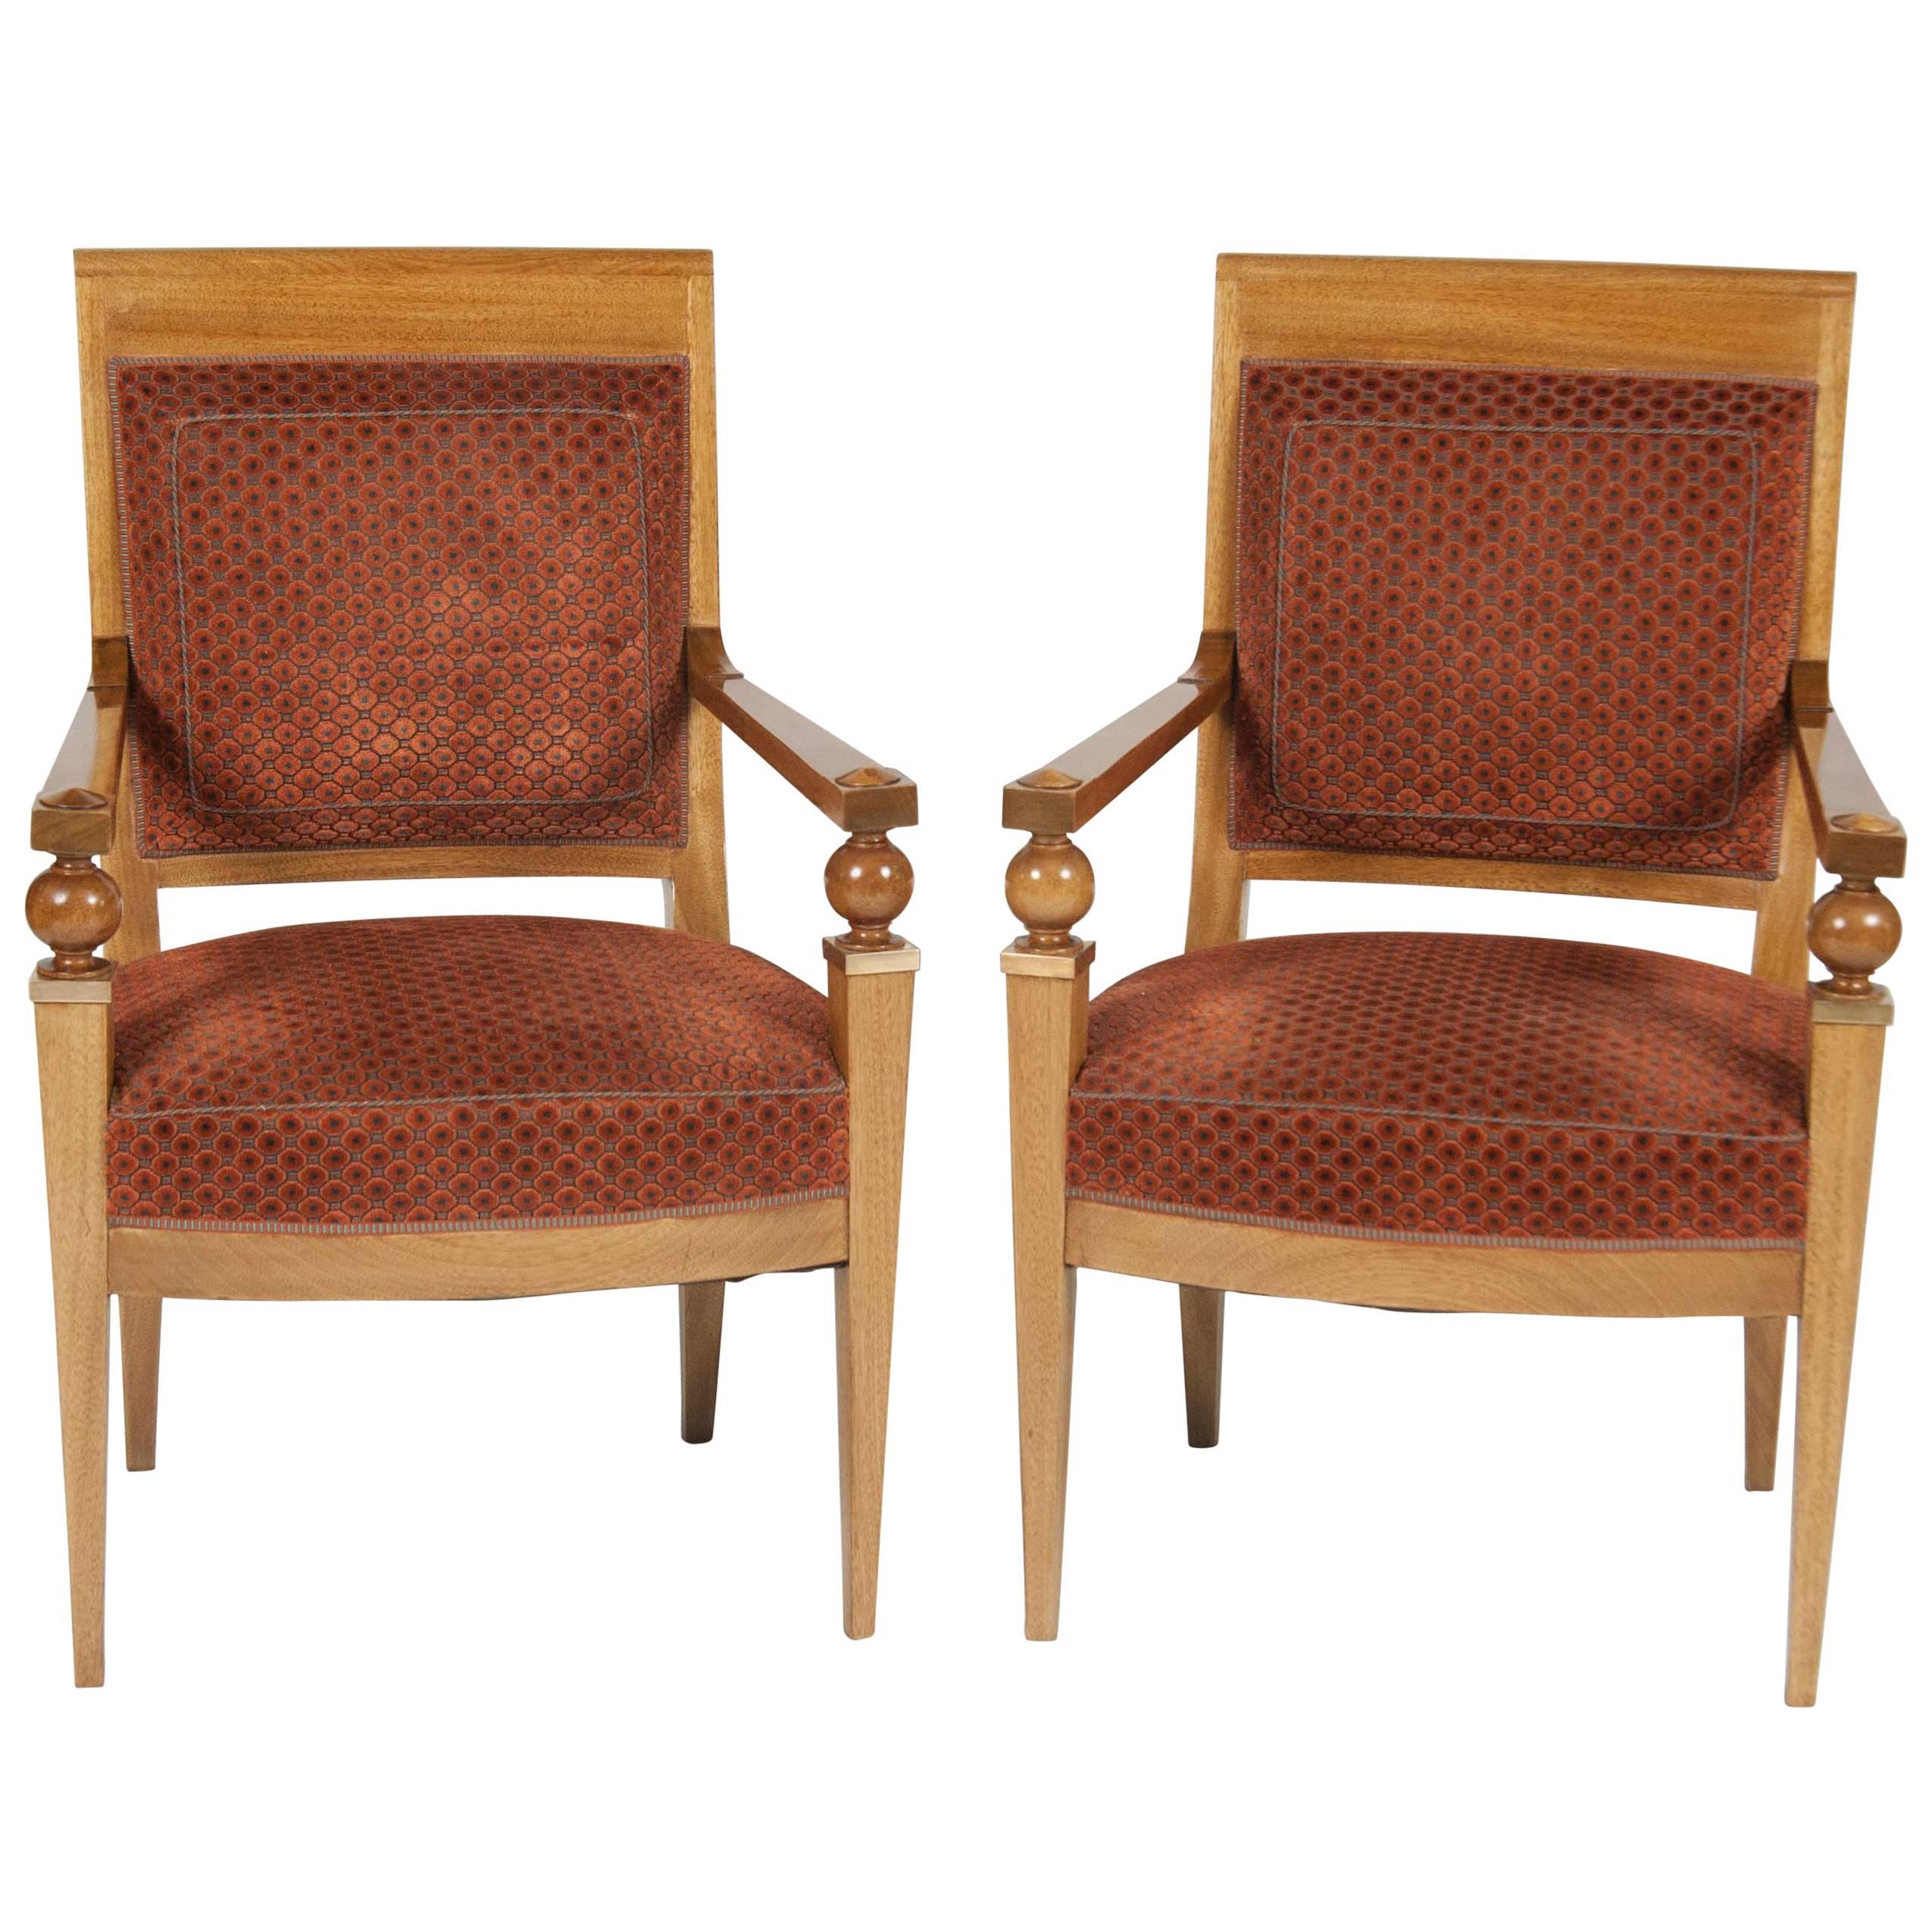 Pair of French Walnut Fauteuil with Bronze Mounts in the Manner of Arbus